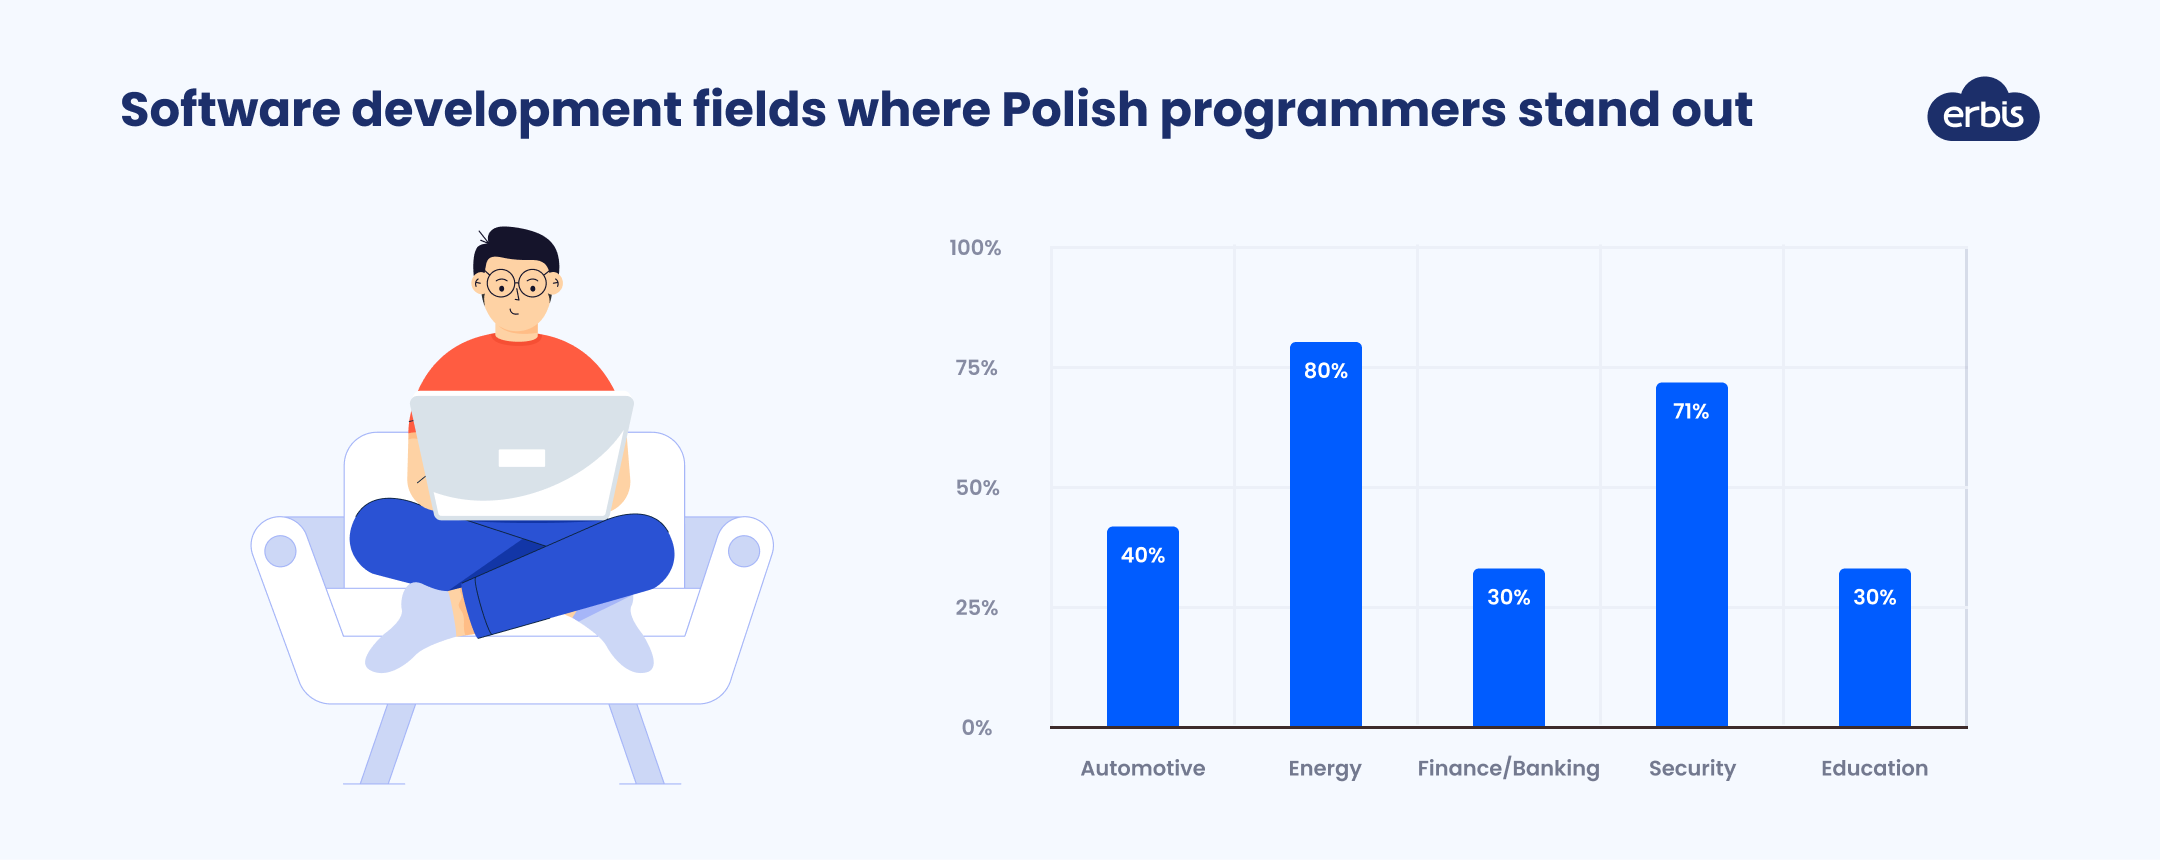 Software development fields where developers from Poland stand out